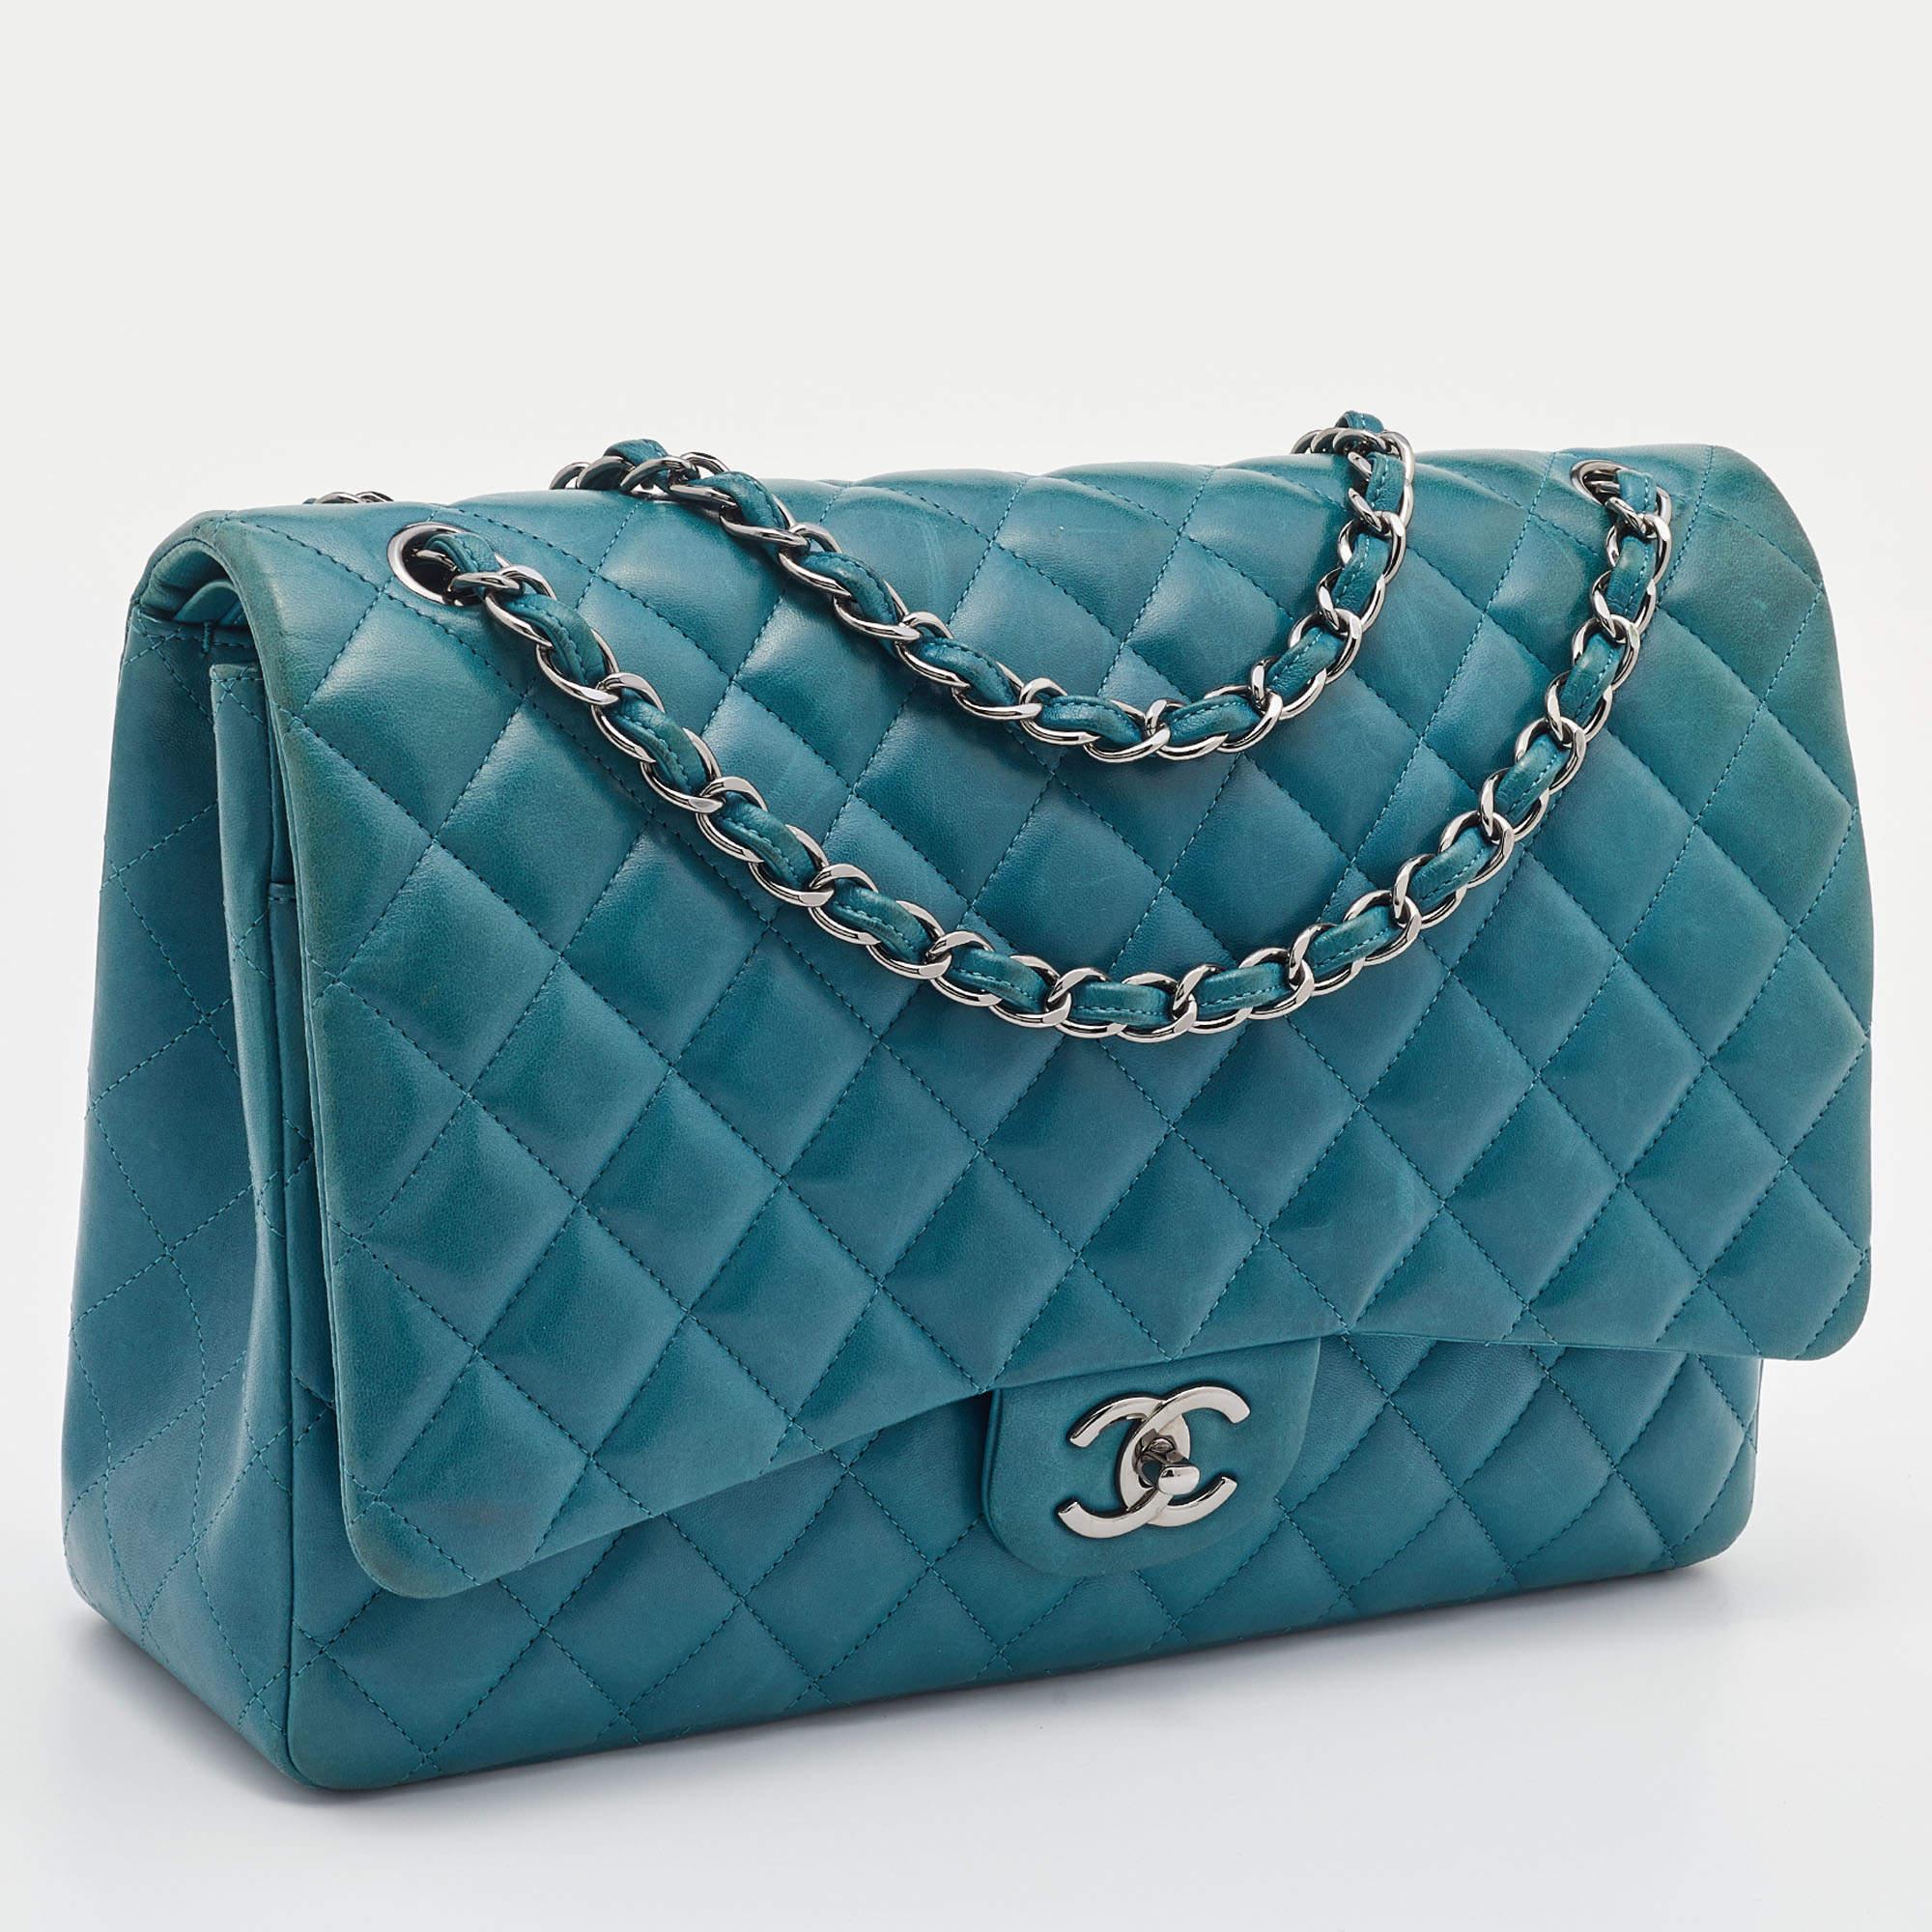 Chanel Green Quilted Leather Maxi Classic Double Flap Bag For Sale 3